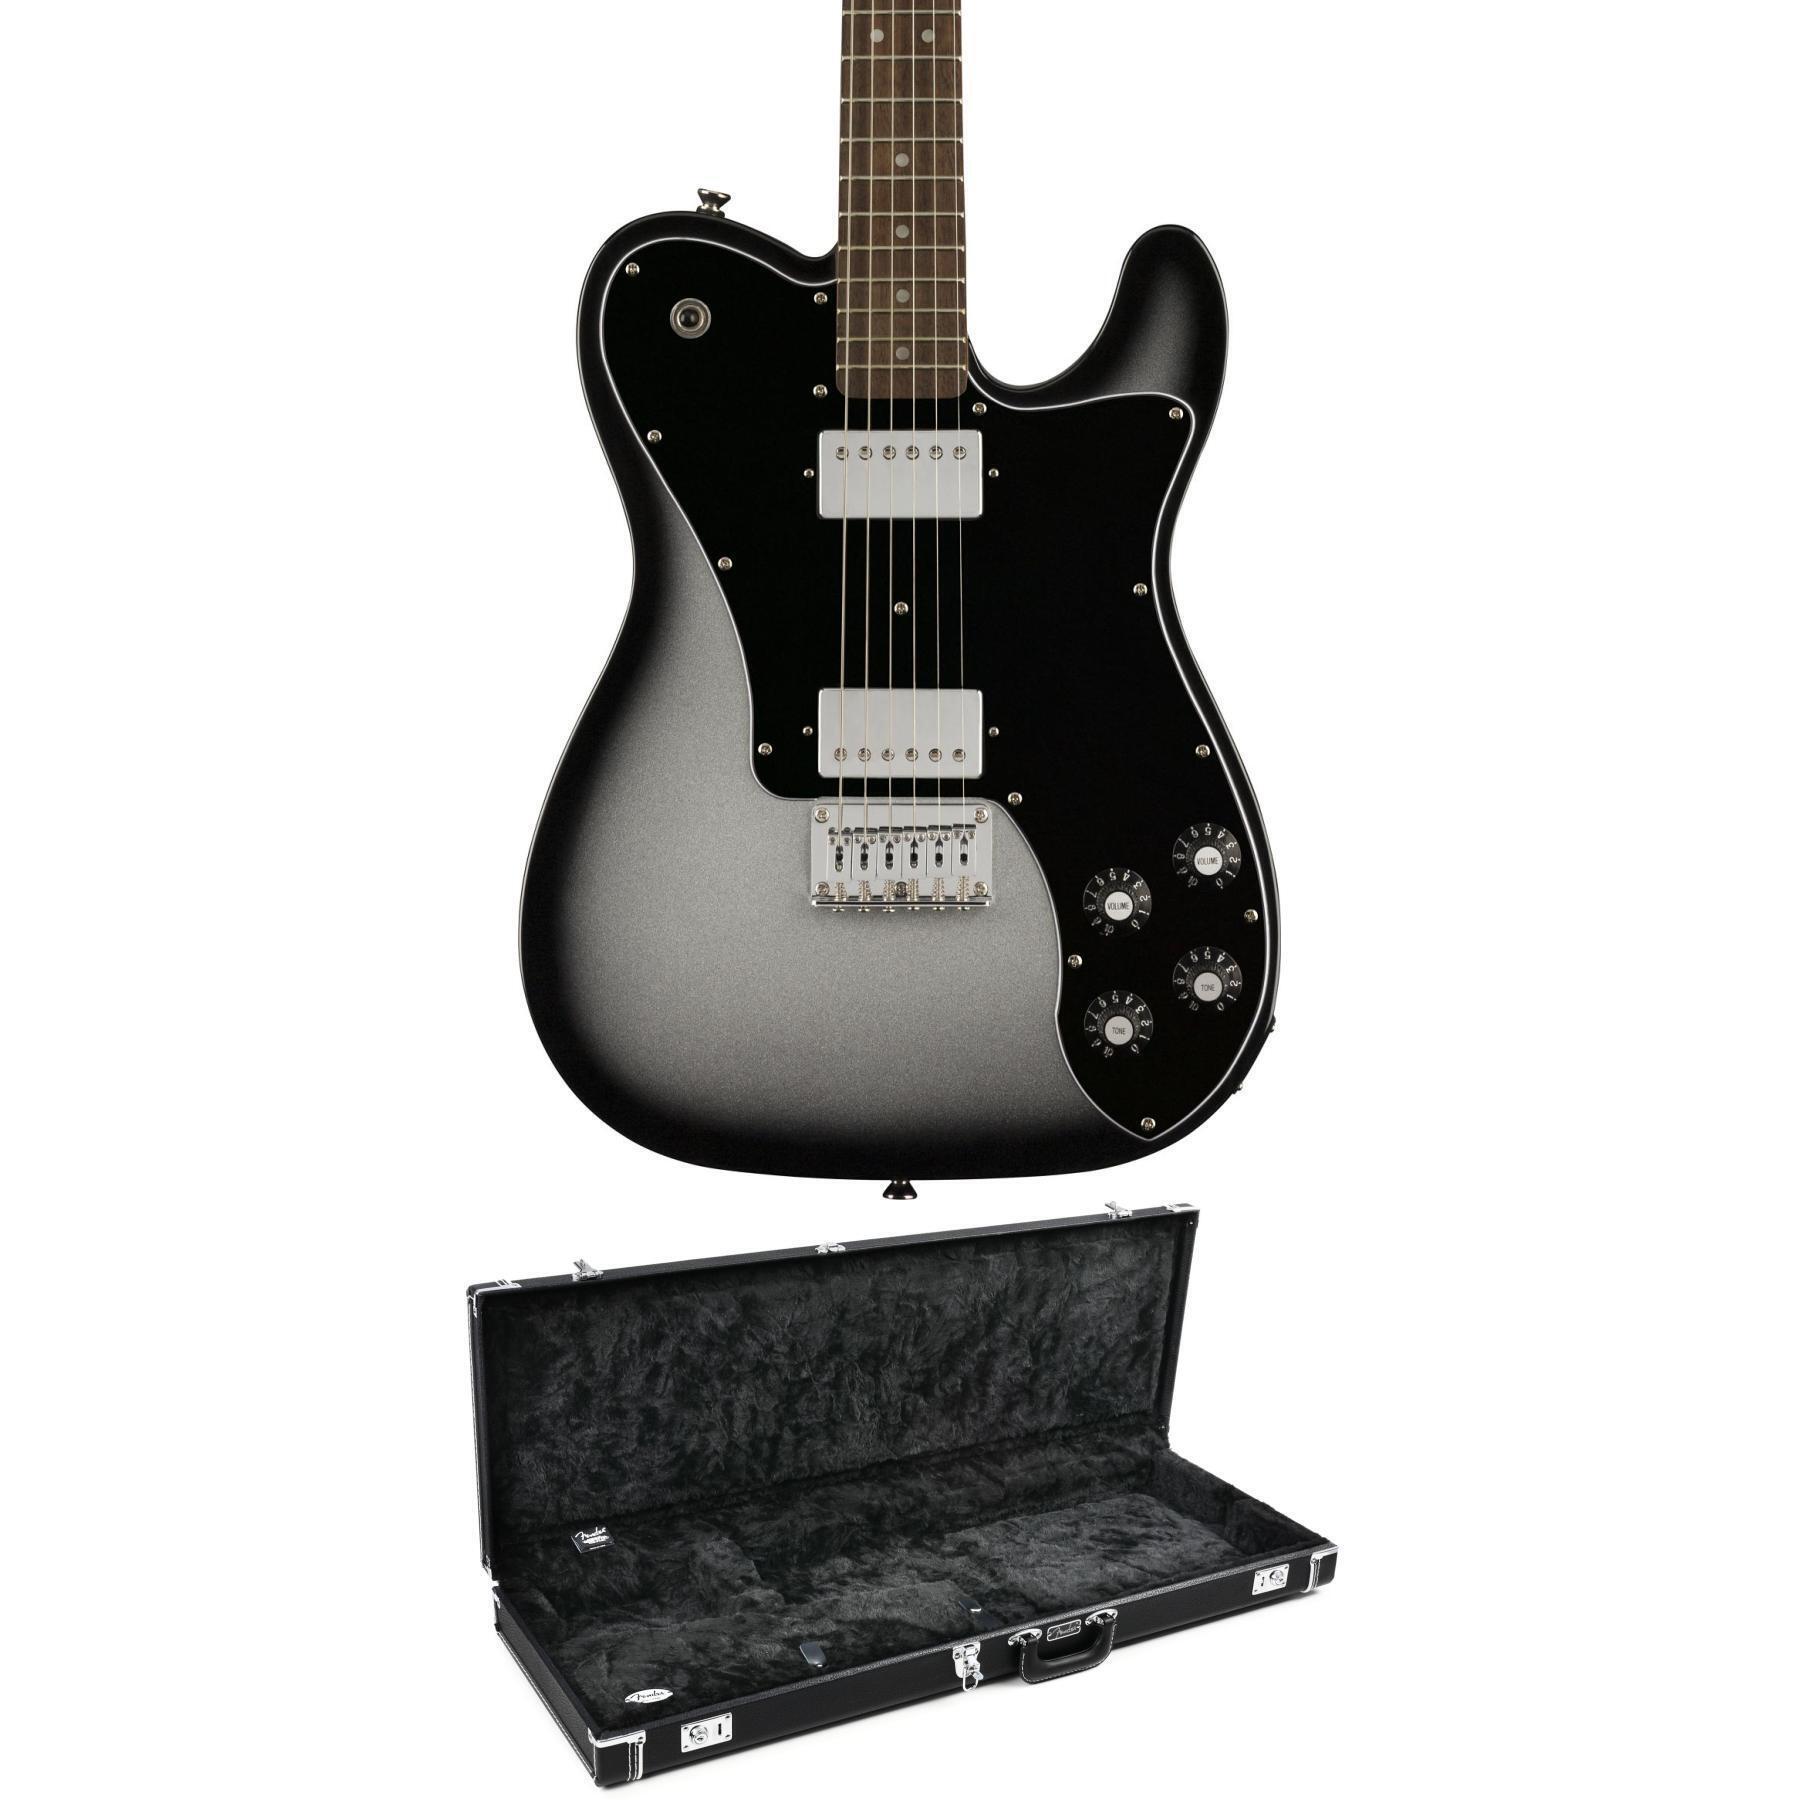 Squier Affinity Series Telecaster Deluxe Electric Guitar with Hard Case -  Silver Burst, Sweetwater Exclusive